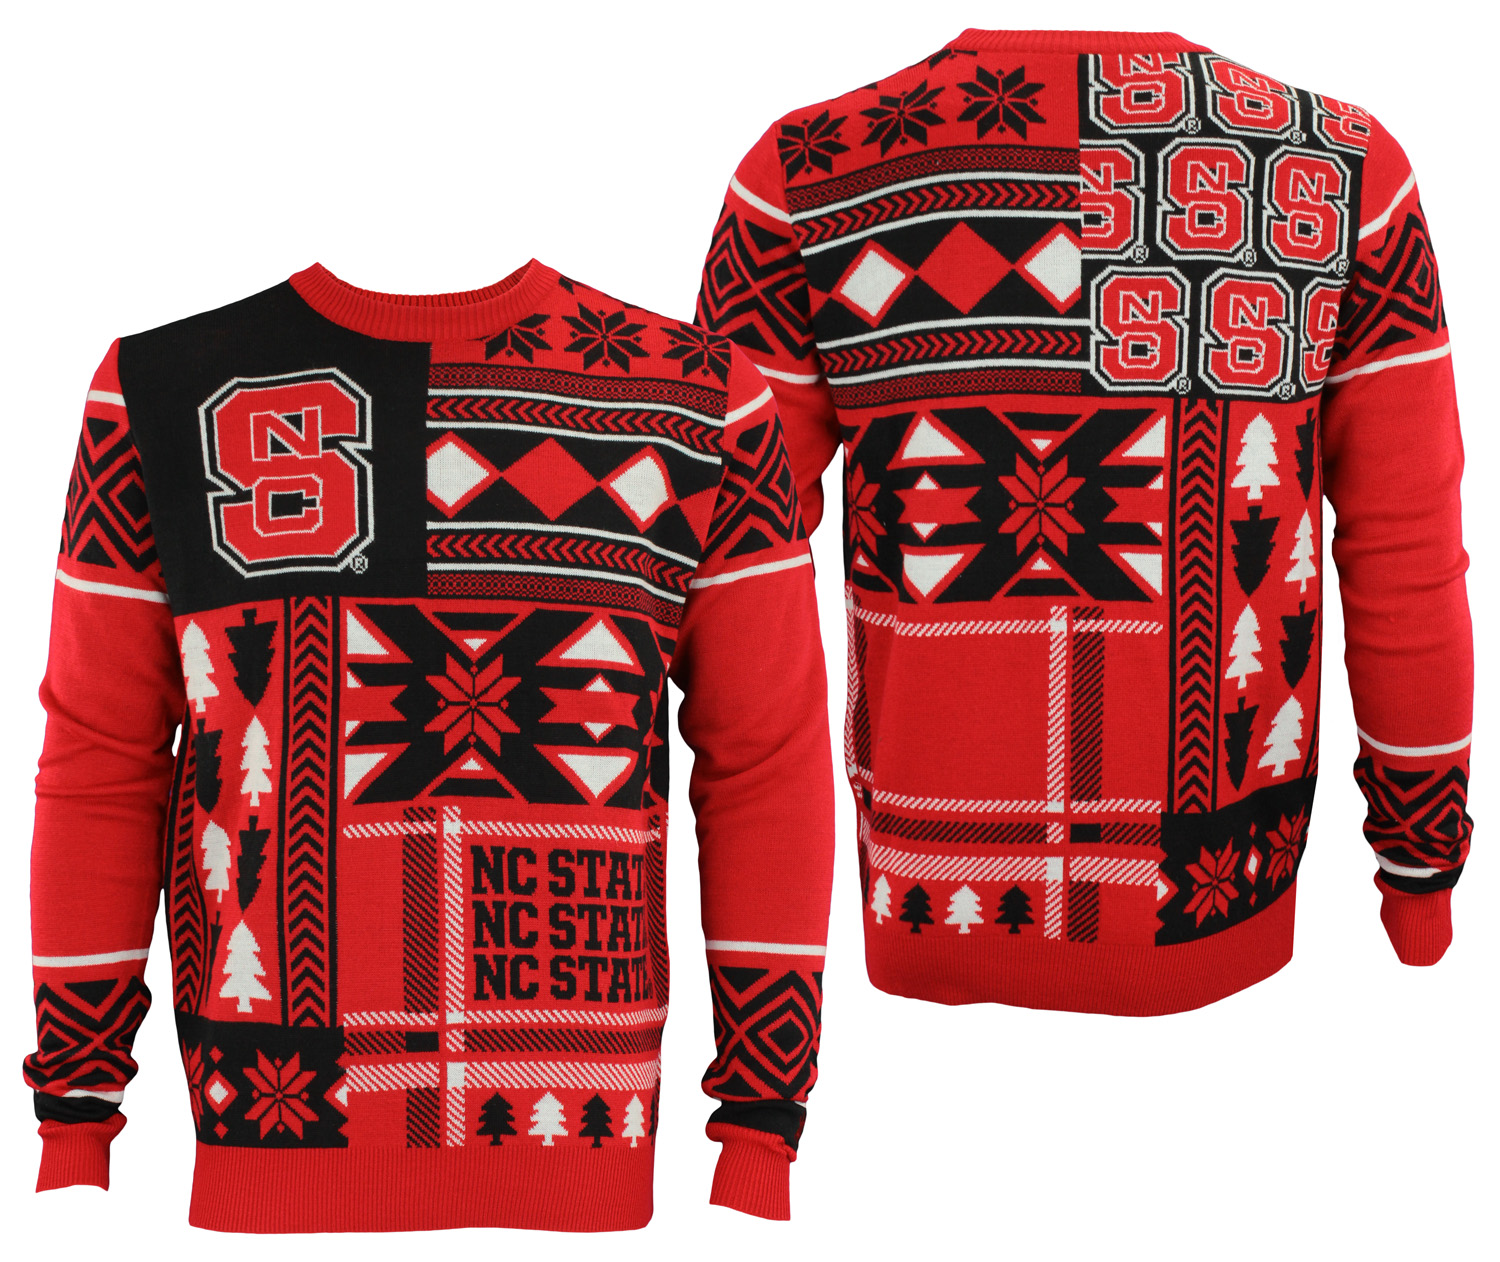 North Carolina State Wolfpack NCAA Mens Holiday Ugly Sweater, Red | eBay